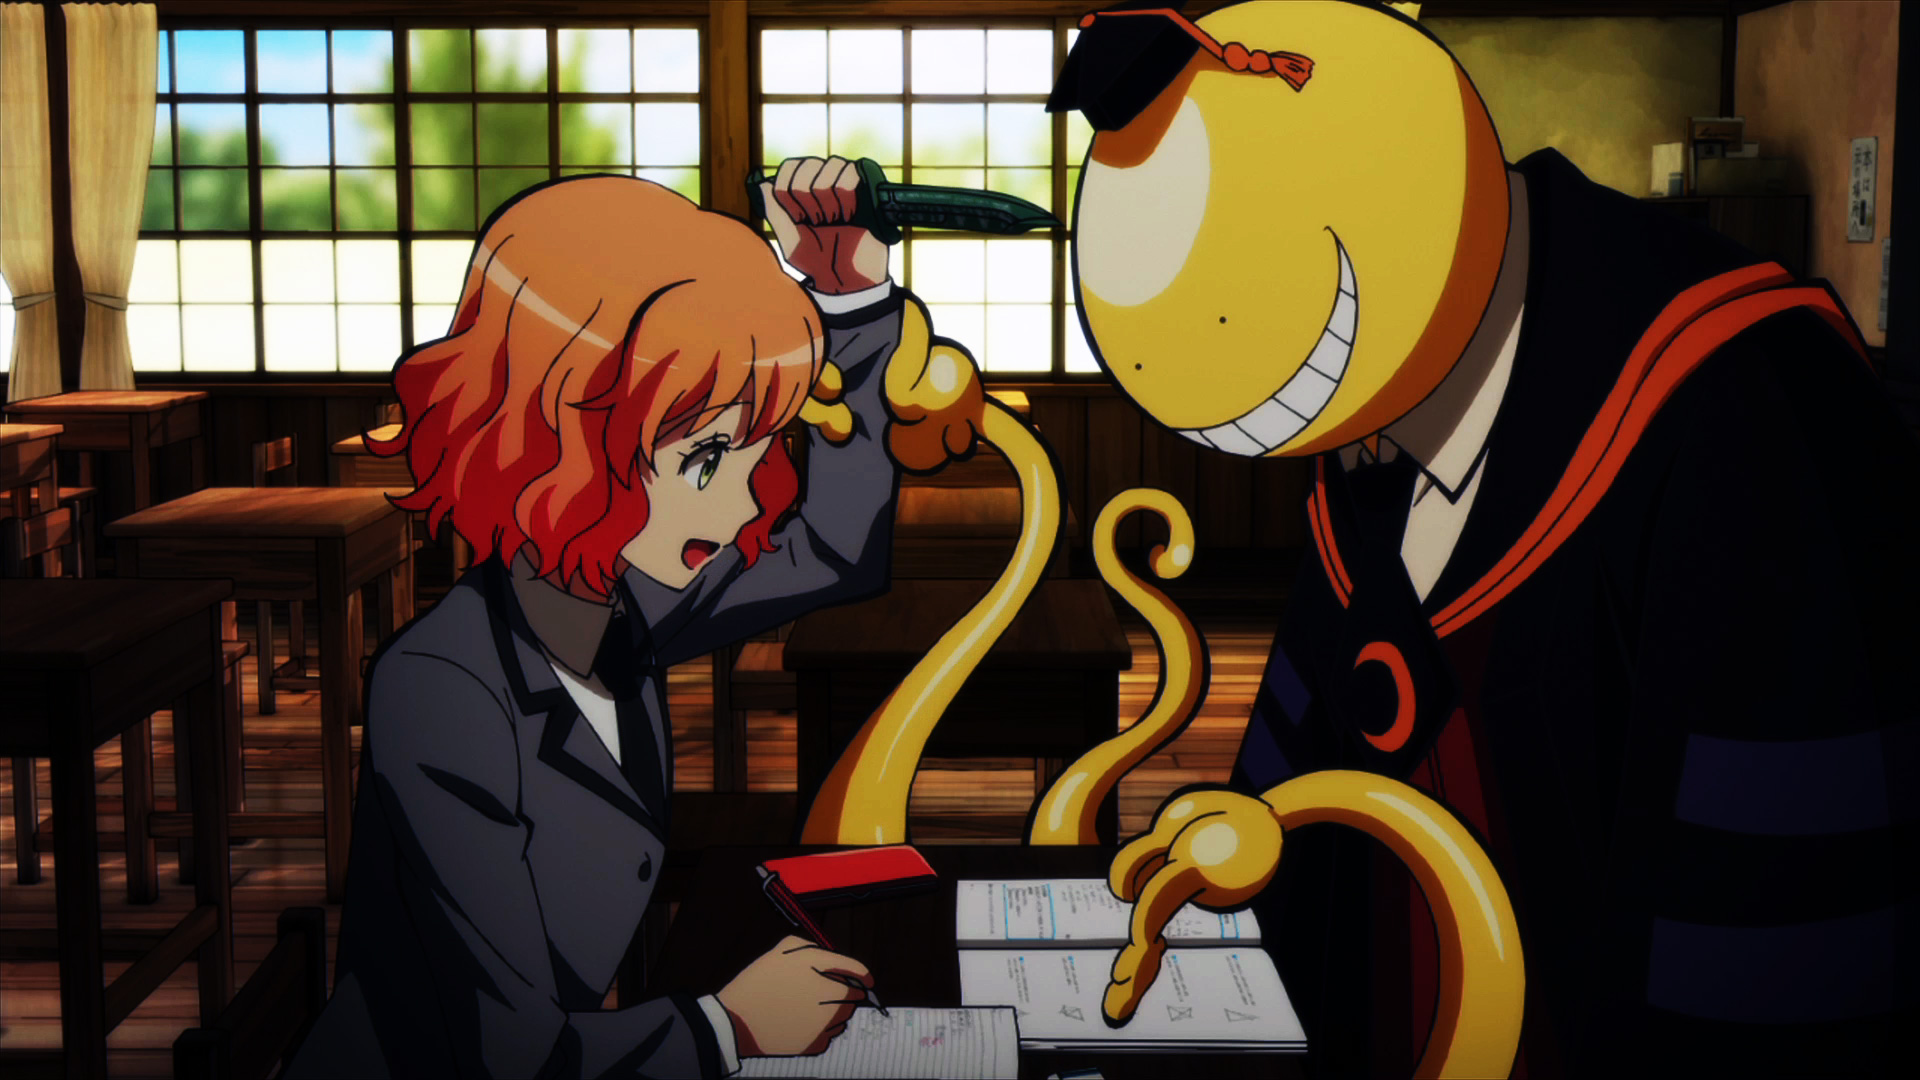 Assassination Classroom Where Can You Watch It Watch Assassination Classroom Season 1 Episode 1 Sub & Dub | Anime